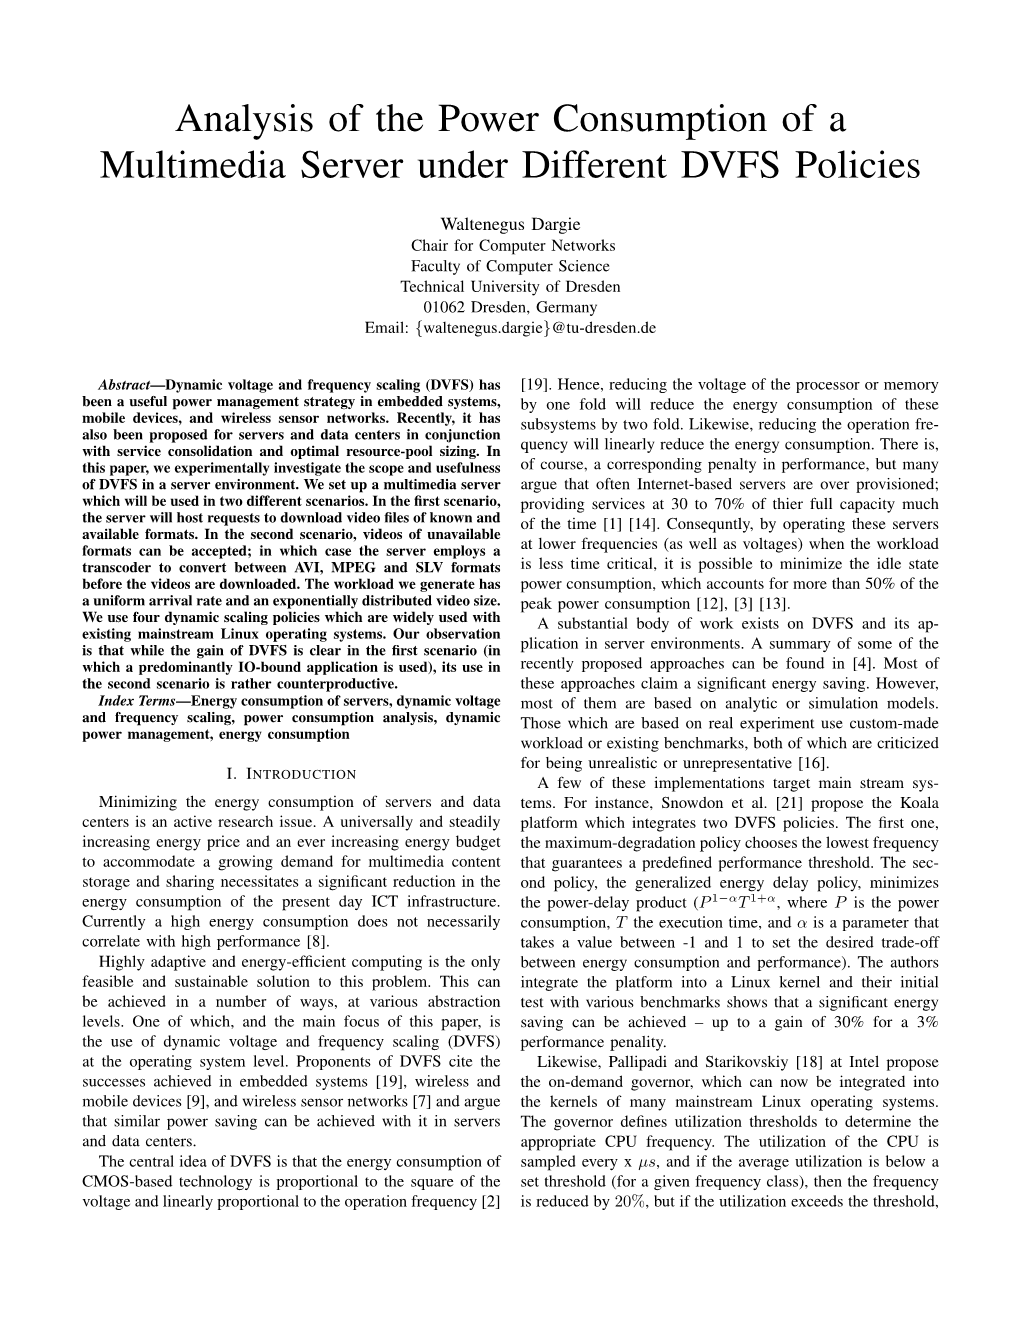 Analysis of the Power Consumption of a Multimedia Server Under Different DVFS Policies